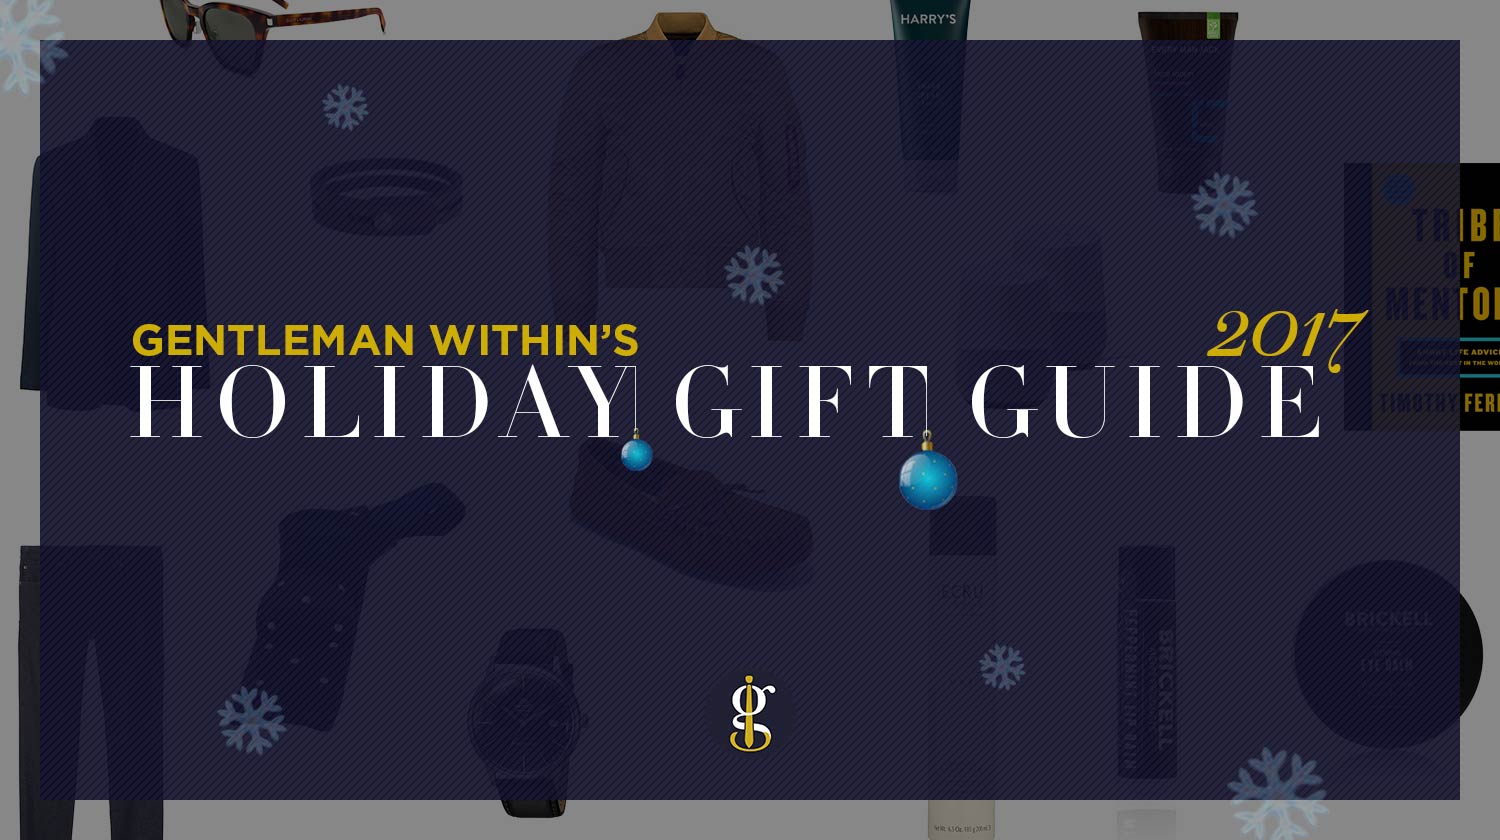 Holiday Gift Guide 2017 | GENTLEMAN WITHIN